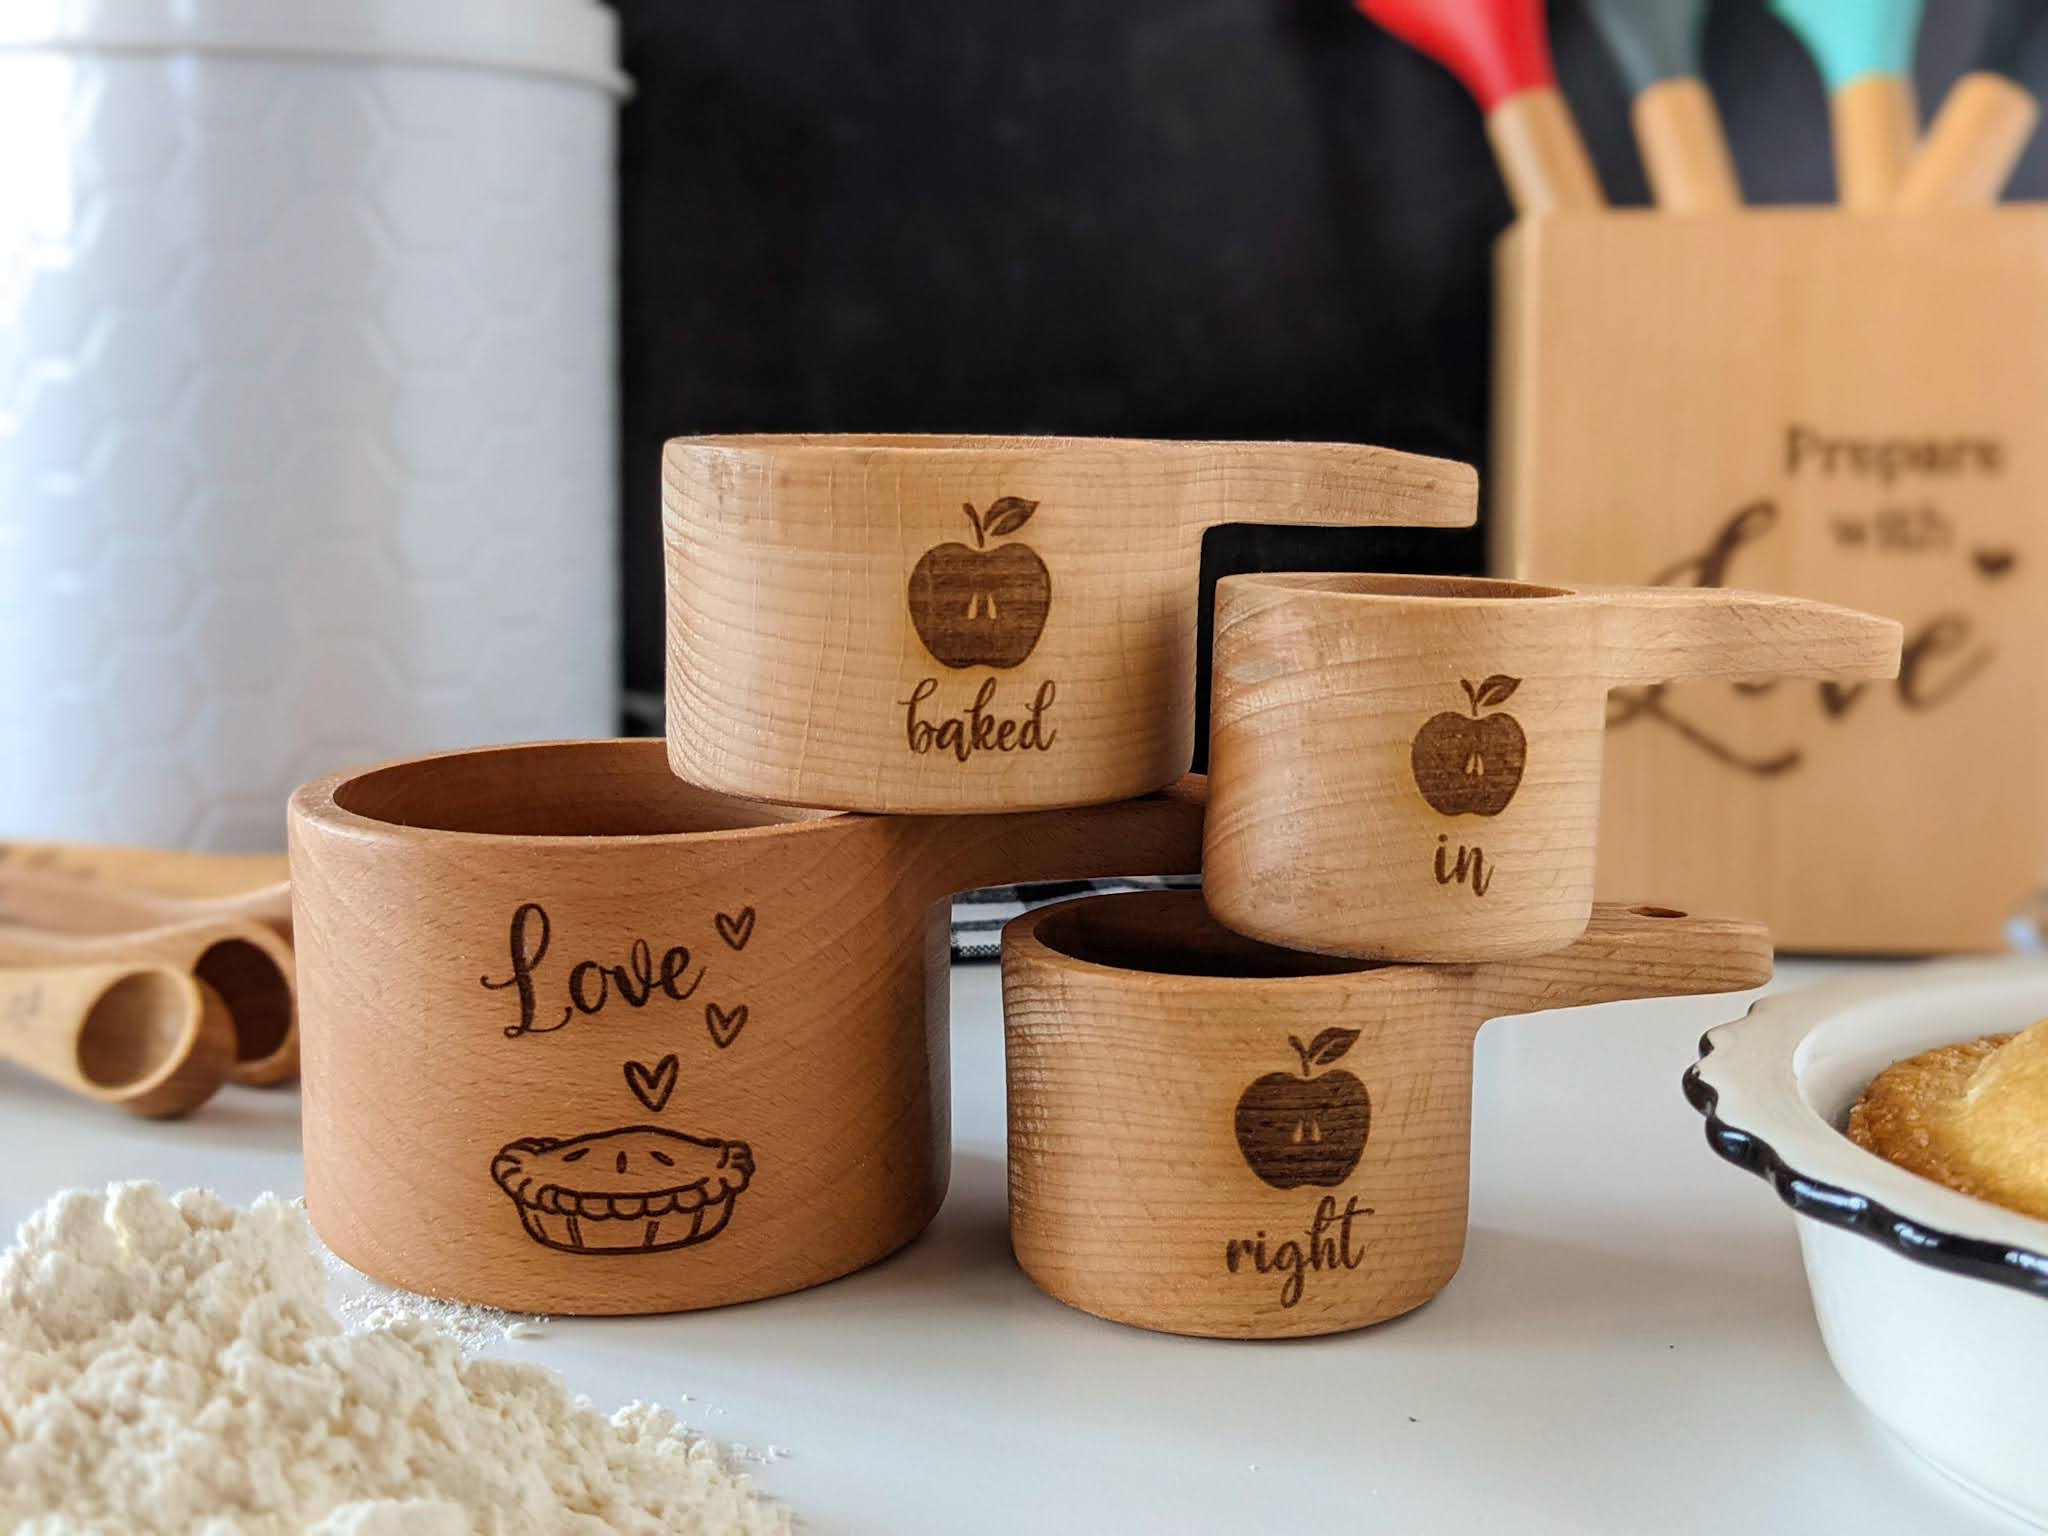 Christmas Gift Box, Wooden Measuring Cups, Measuring Spoons, Baking Gifts,  Employee Christmas Gifts, 